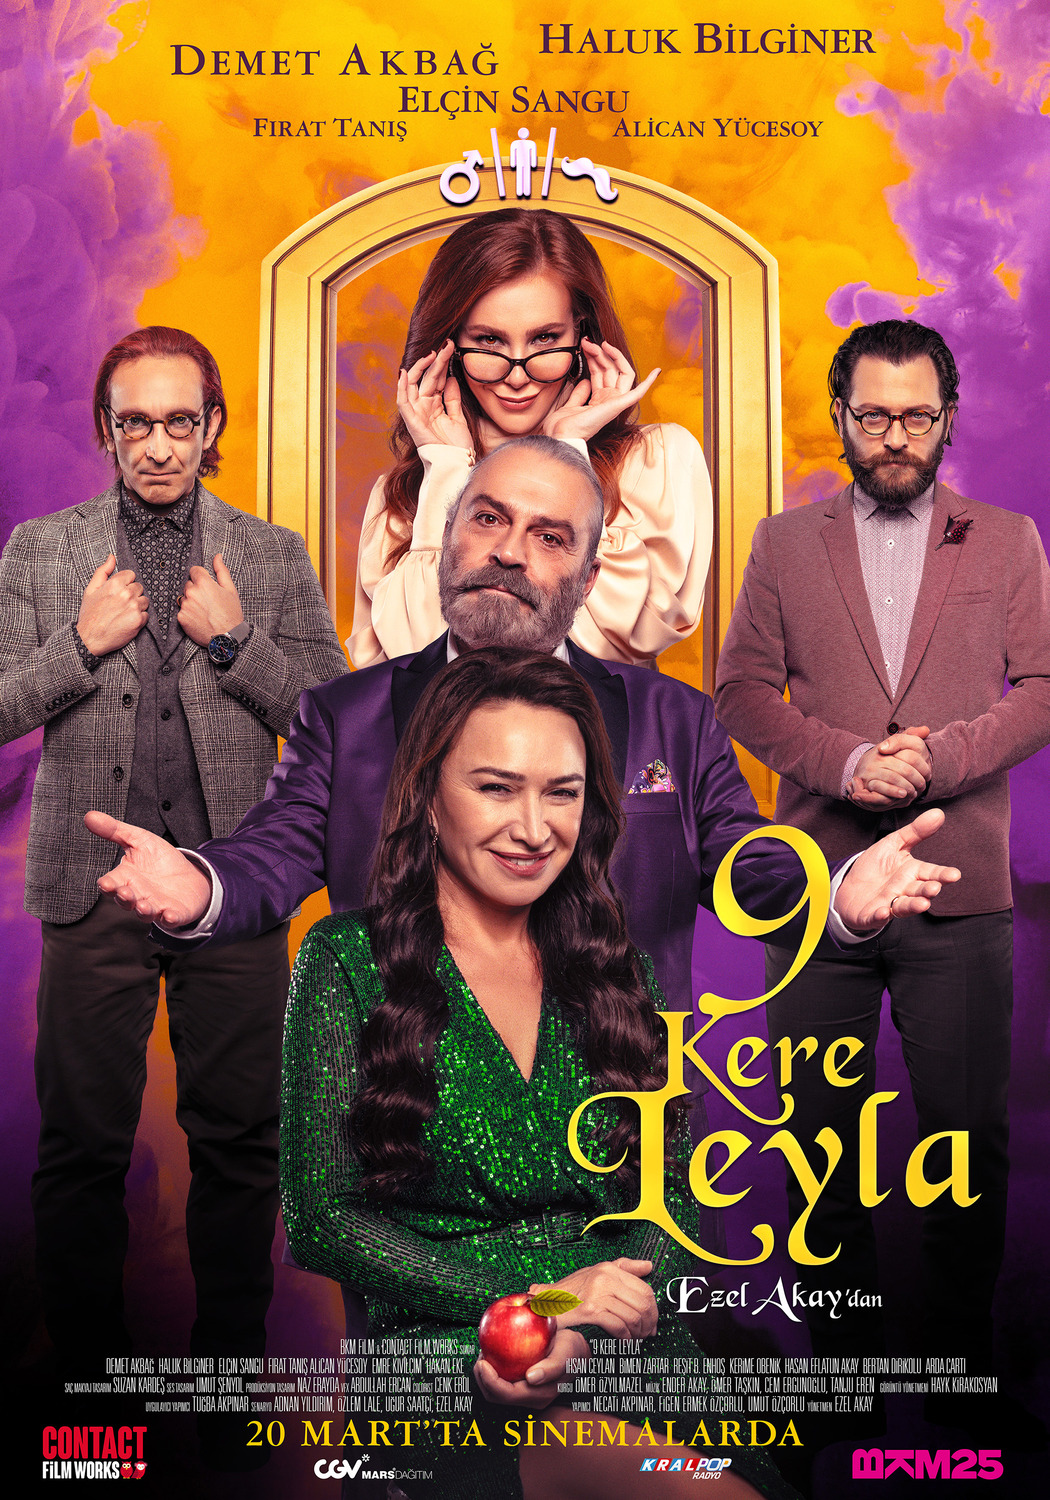 Extra Large Movie Poster Image for 9 Kere Leyla (#2 of 2)